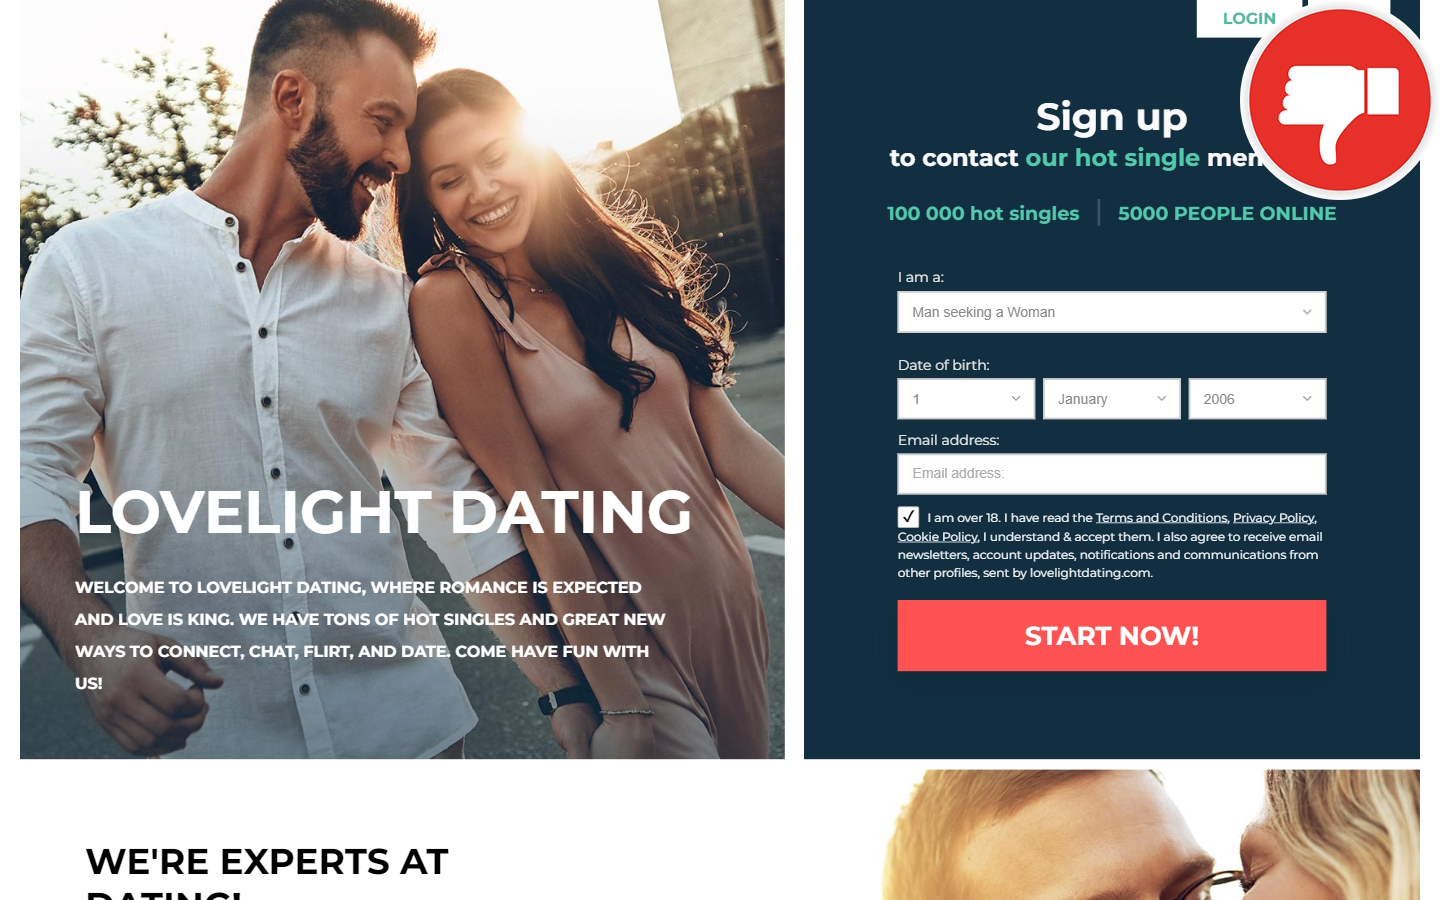 Review LoveLightDating.com Scam